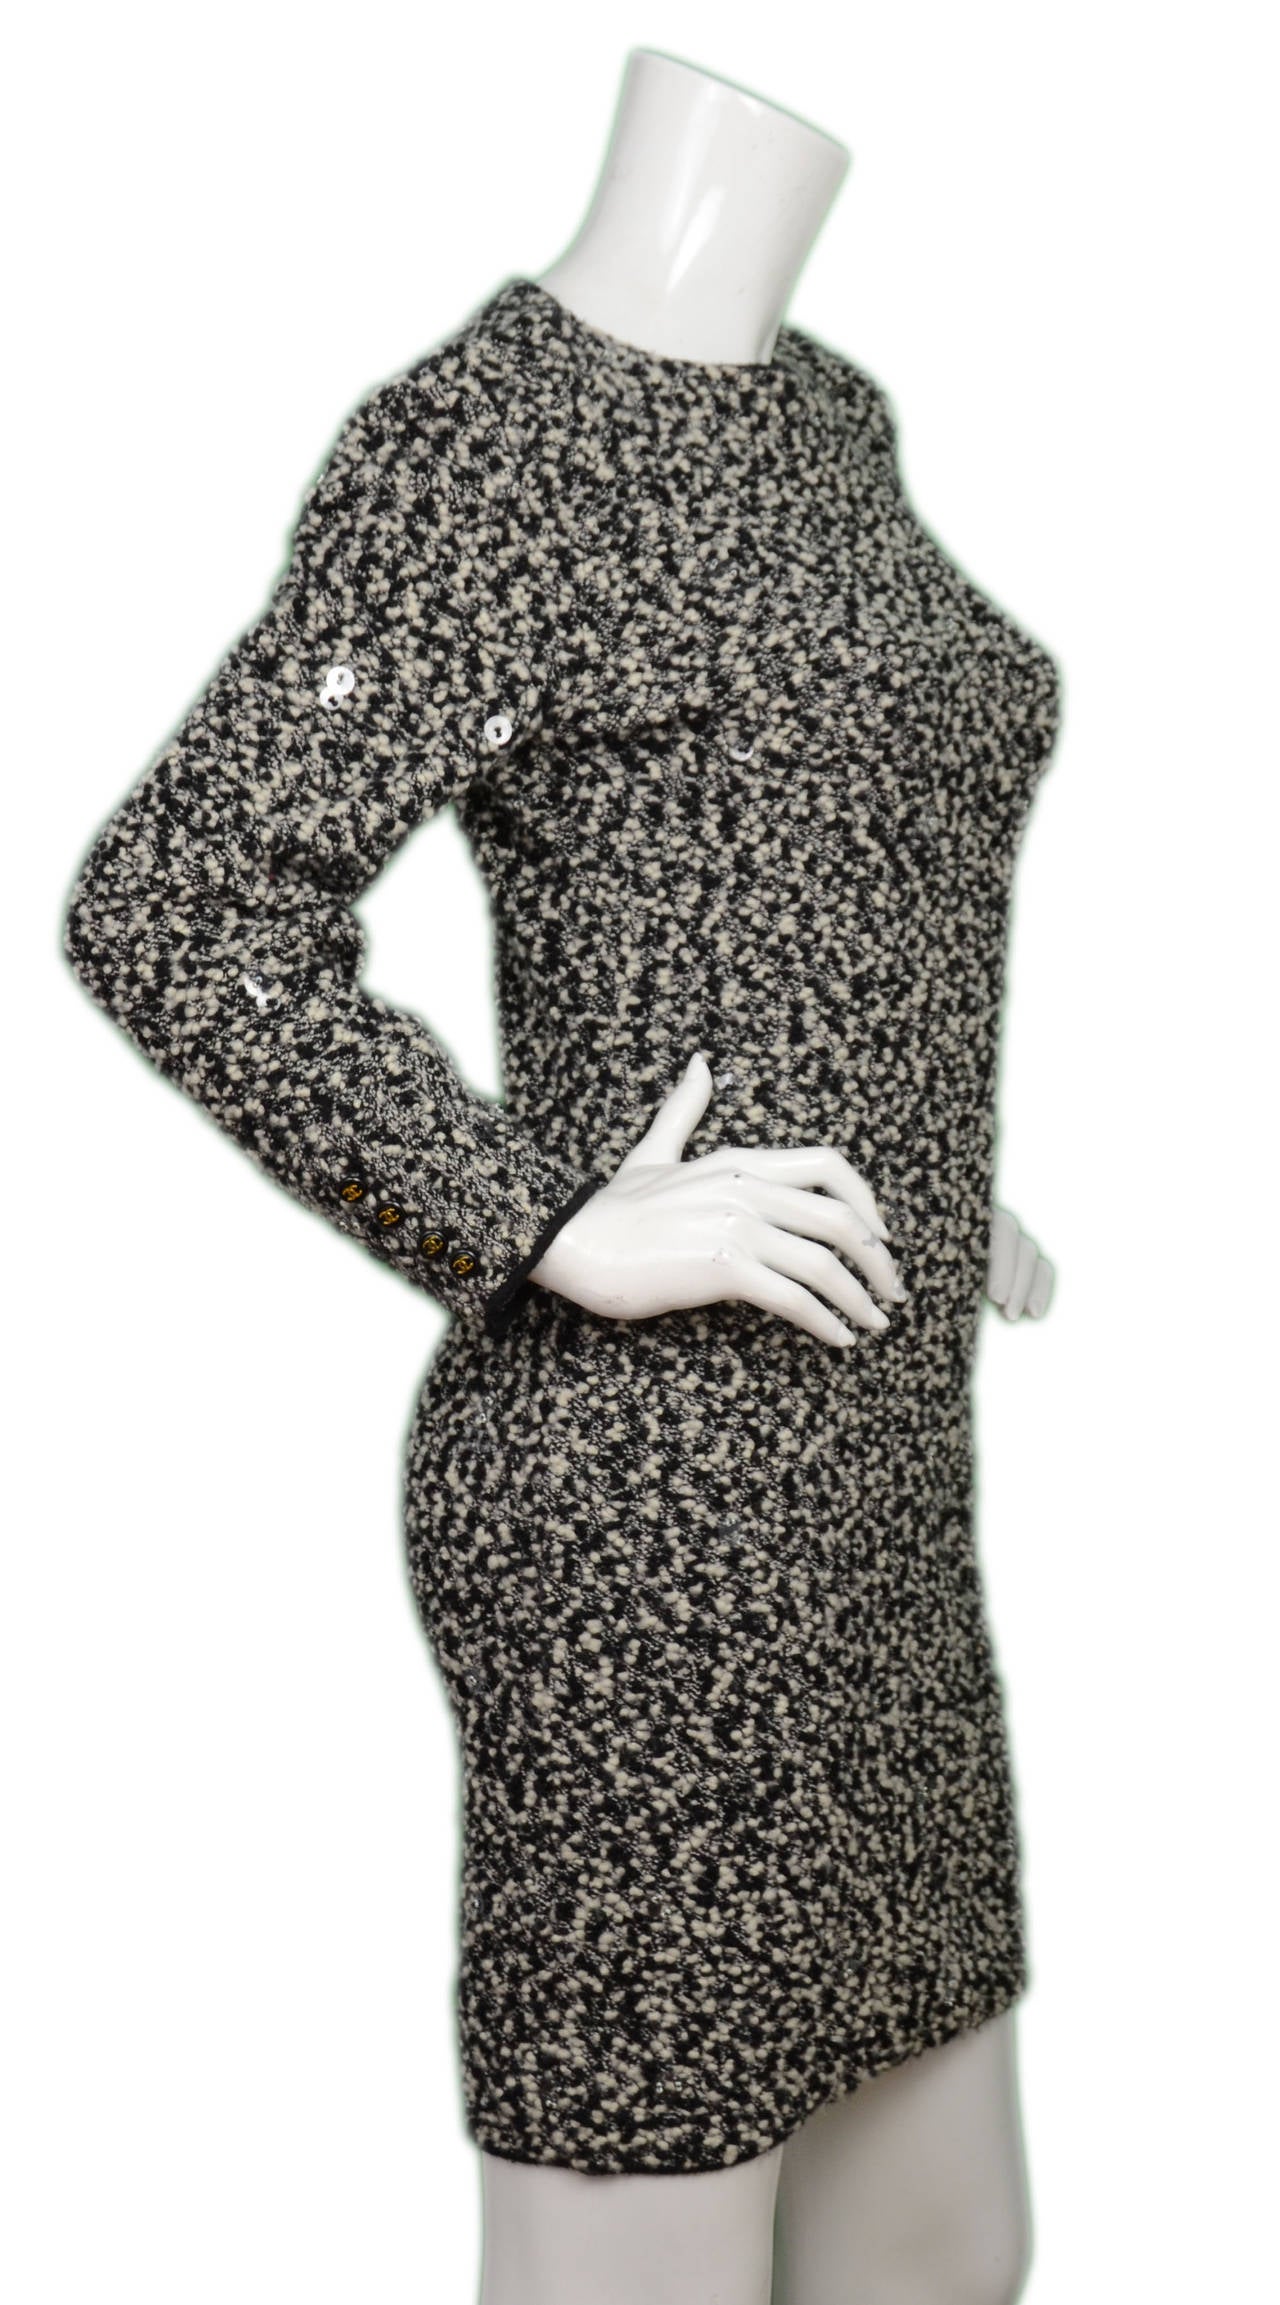 Features clear sequins throughout the dress

-Made in: Italy
-Year of Production: 1996
-Color: Black and white
-Composition: 85% Laine Wool, 15% Nylon
-Lining: 85% Wool, 15% Nylon
-Closure/opening: Slips on over the head
-Overall Condition: